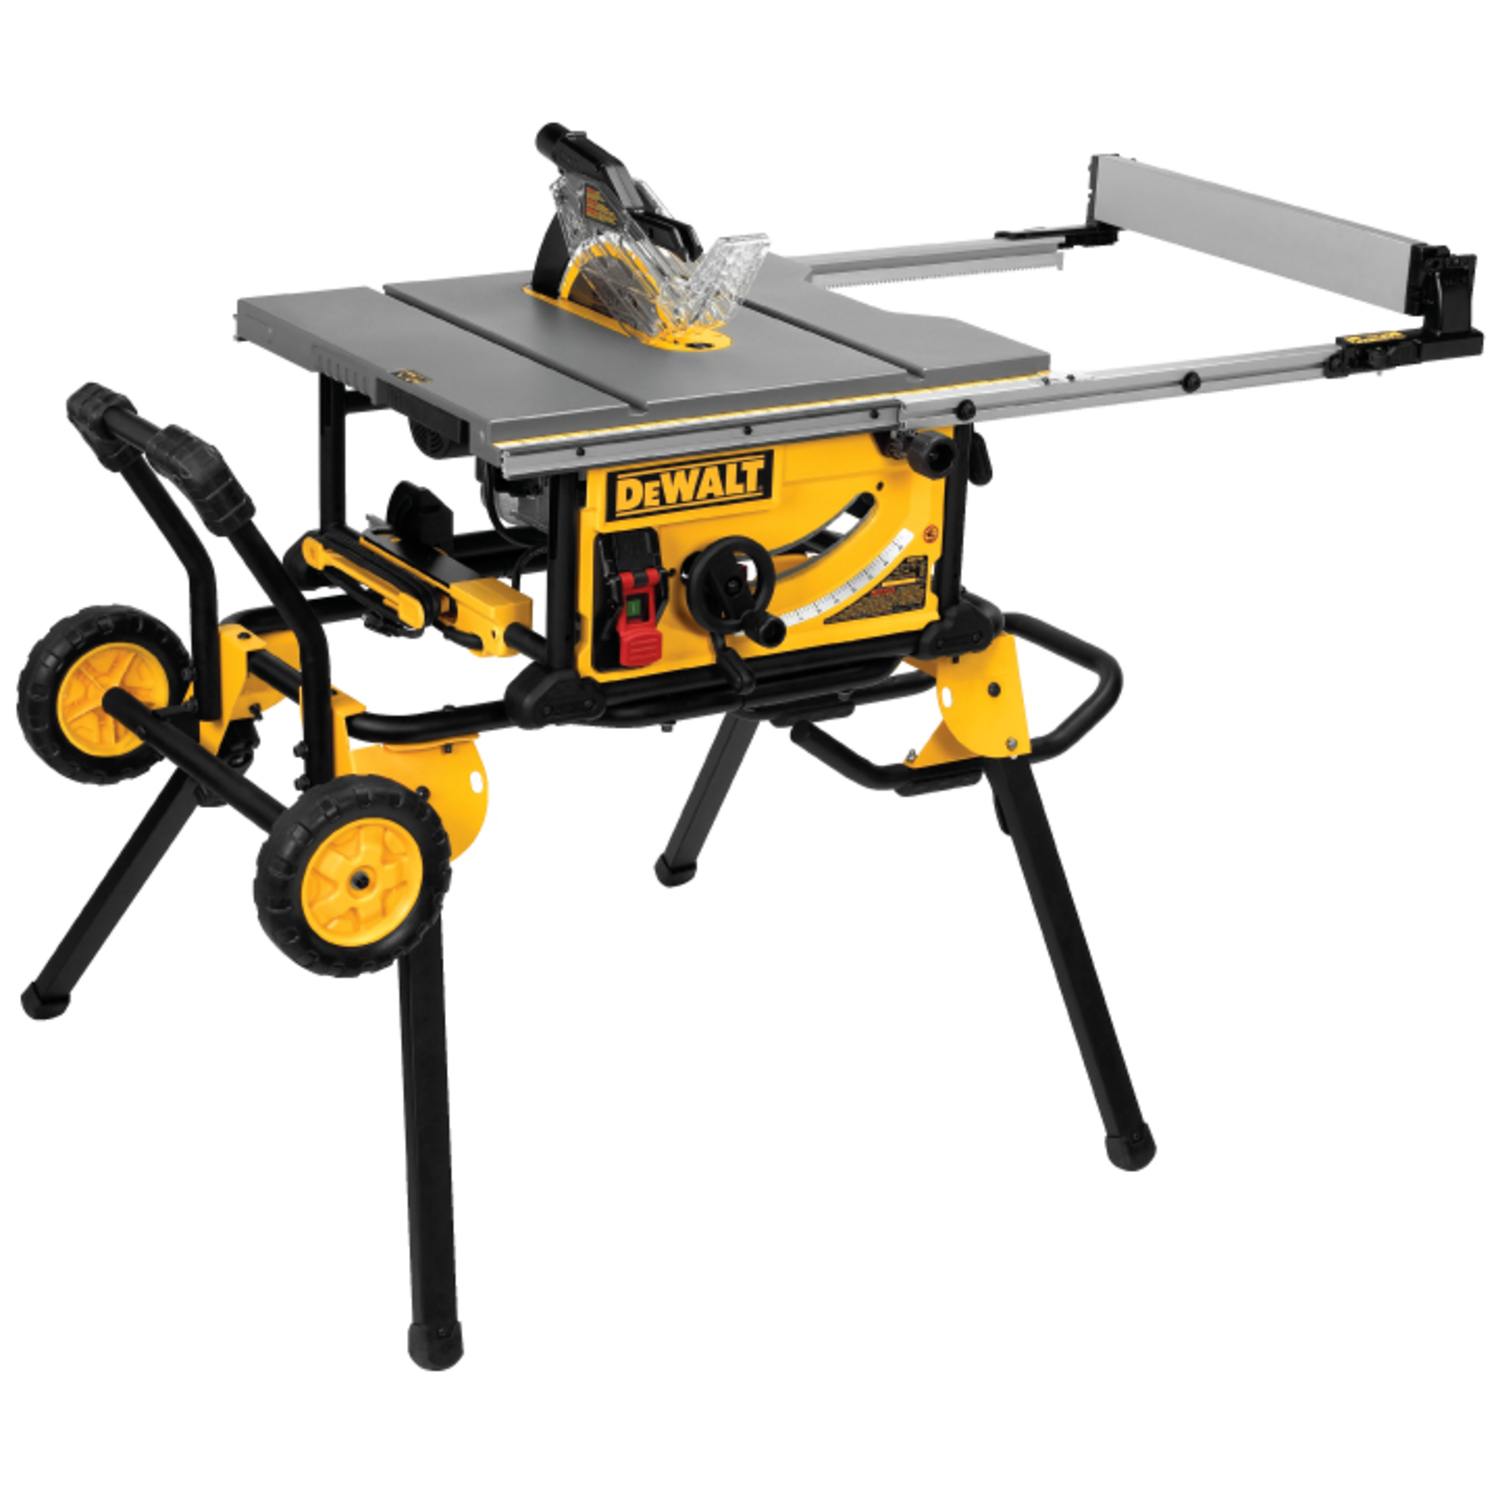 Dewalt 15 amps Corded 10 in. Table Saw